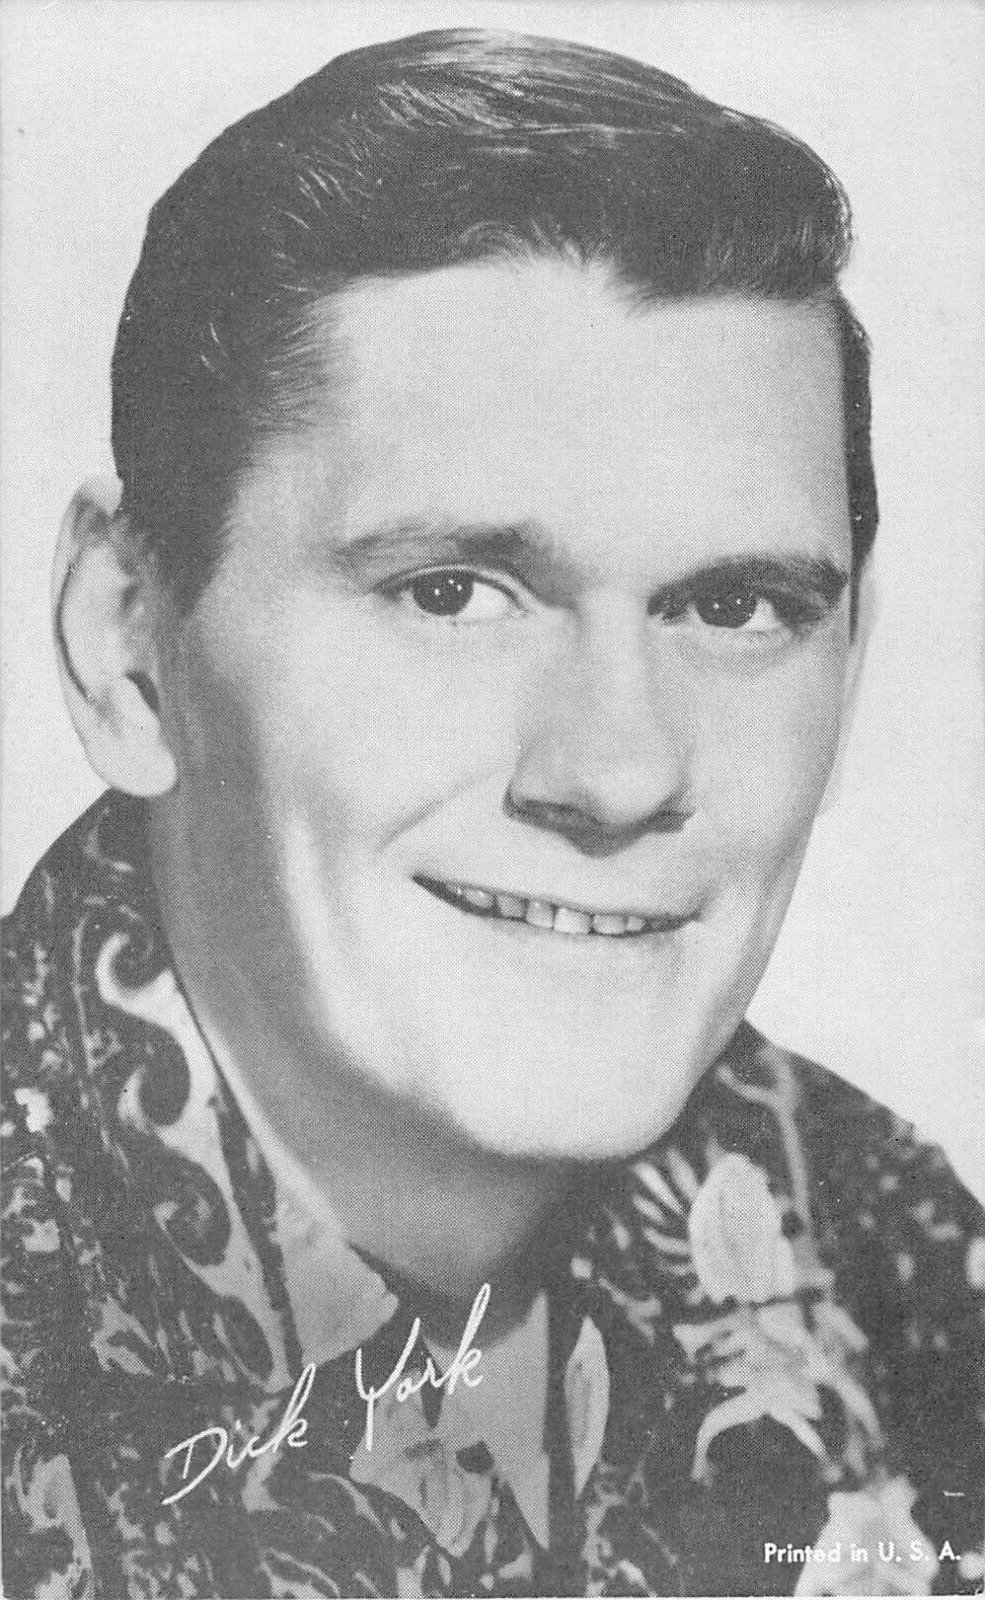 Dick York TV Star Bewitched Actor The First Darrin Stephens Arcade Card Postcard